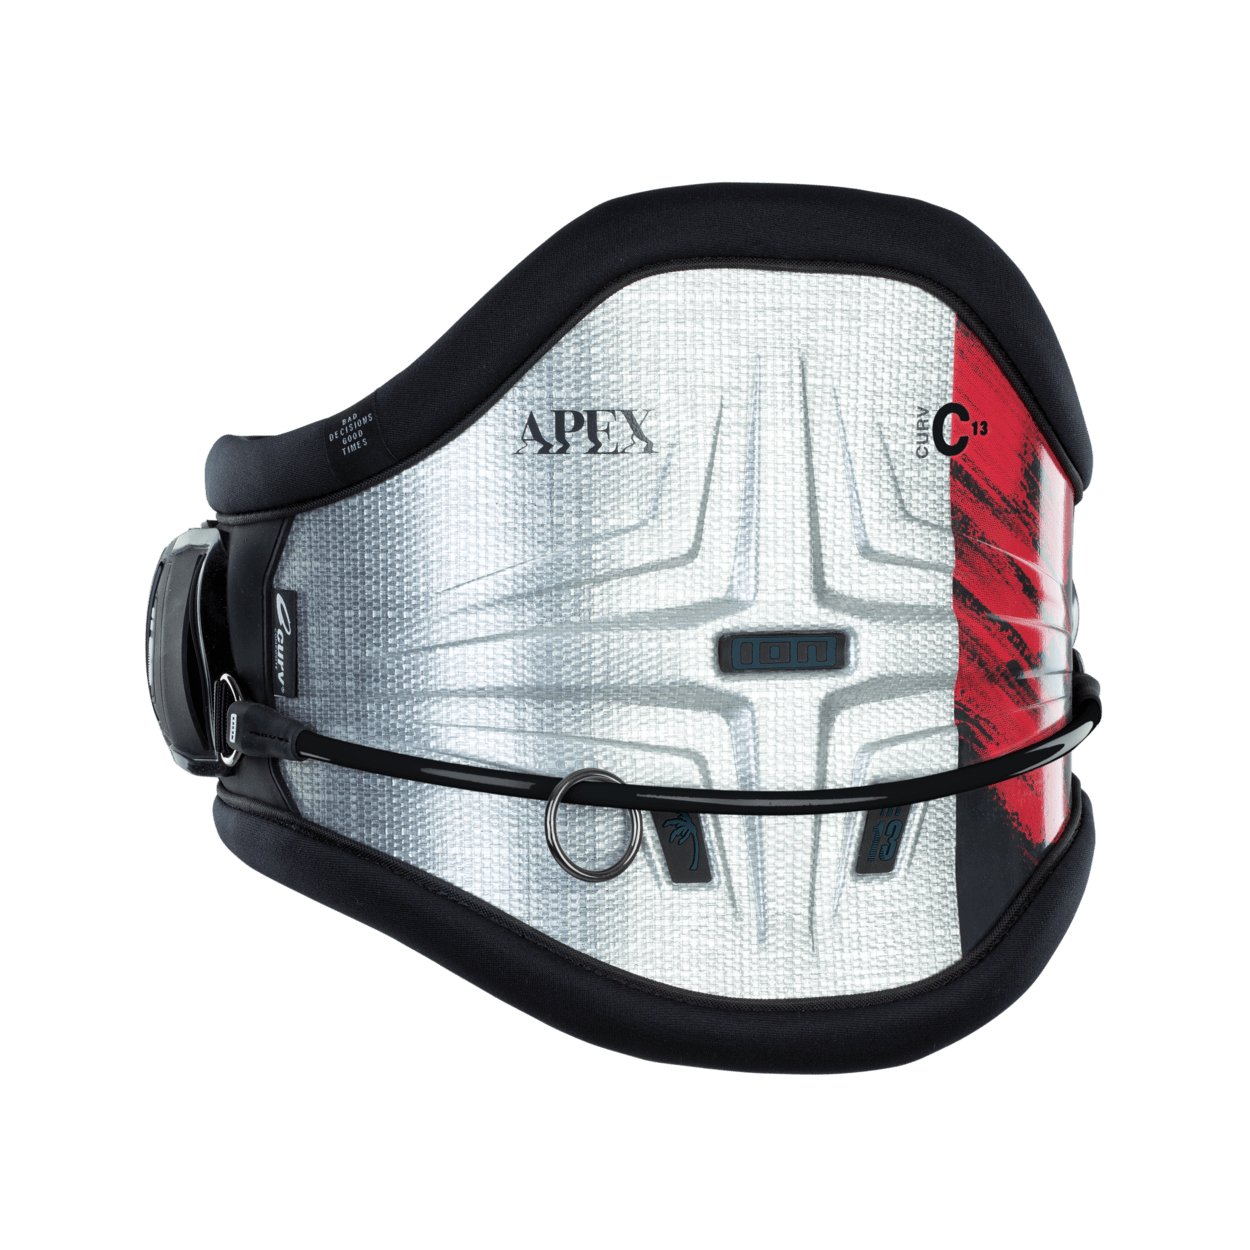 ION Apex Curv 13 2021 - Worthing Watersports - 9008415943241 - Harness - ION Water